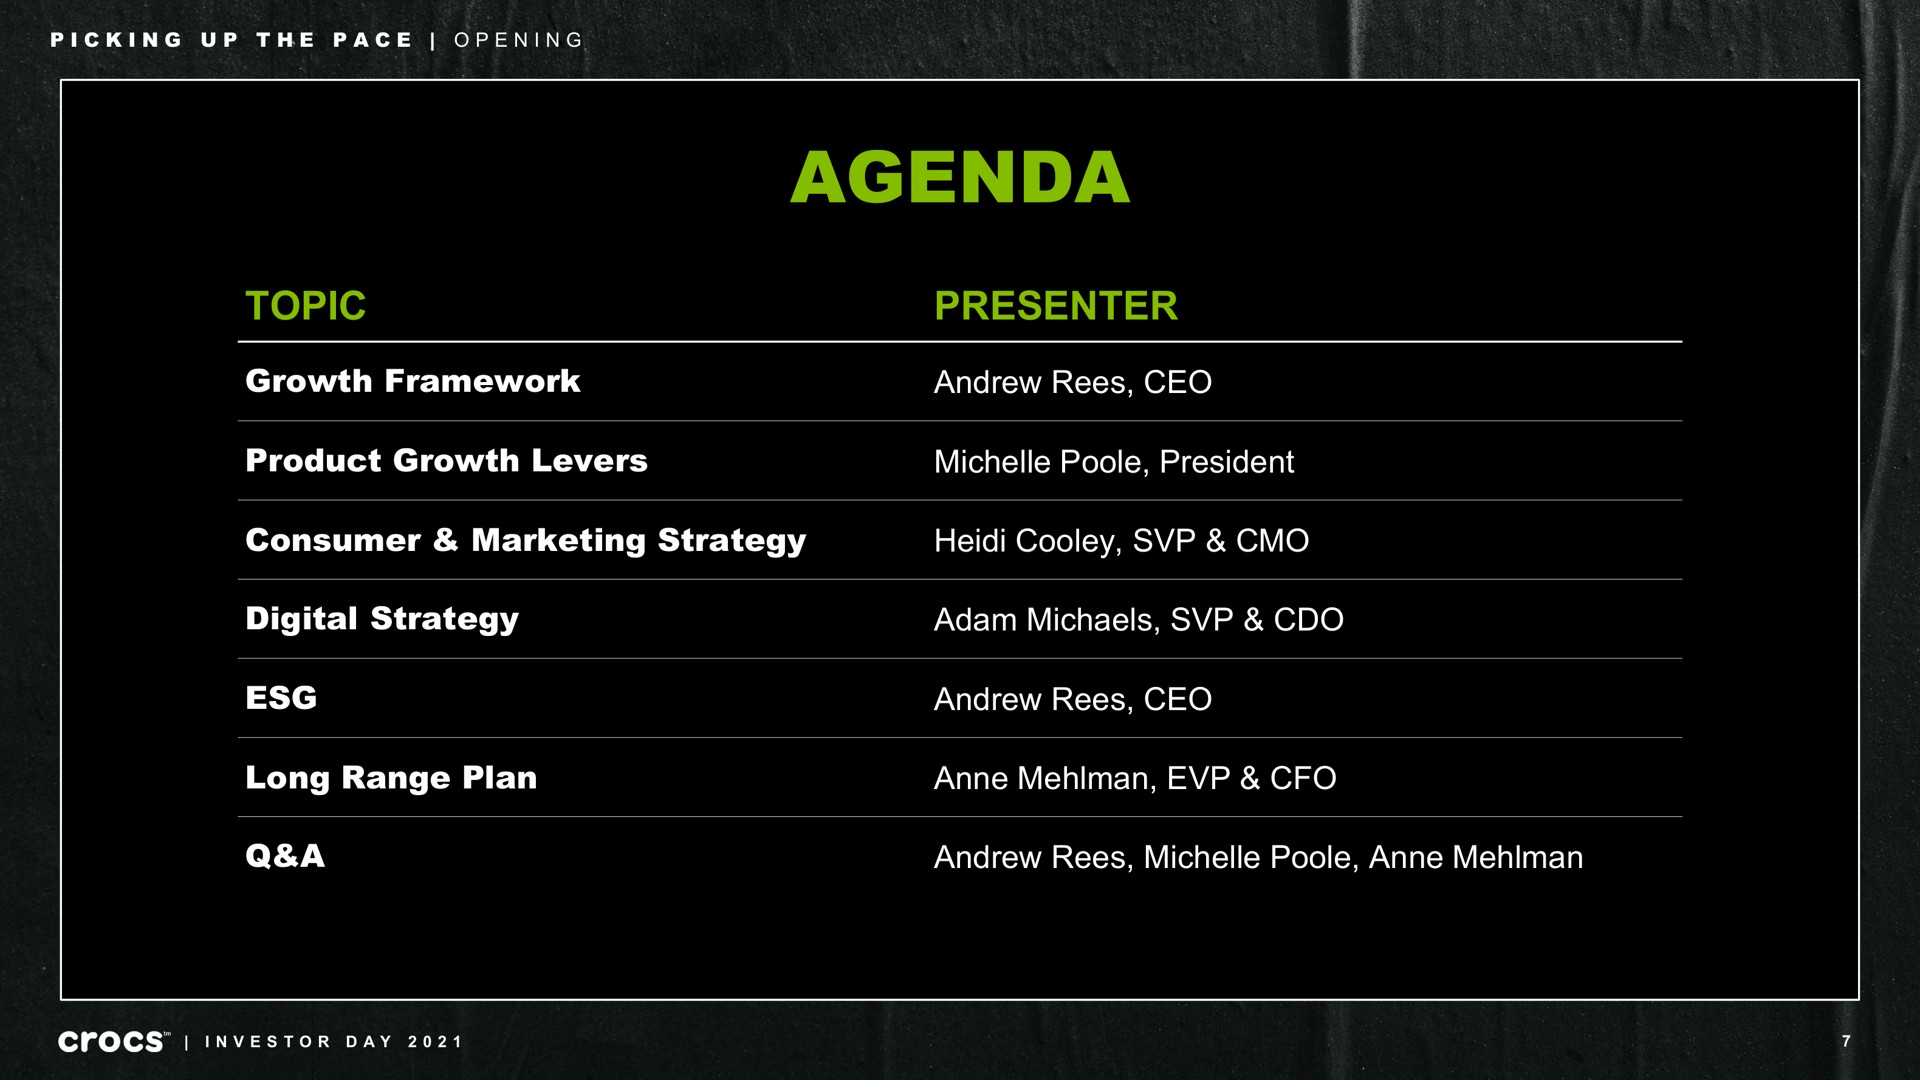 agenda topic growth framework presenter product growth levers president consumer marketing strategy digital strategy long range plan a picking up the pace opening investor day | Crocs